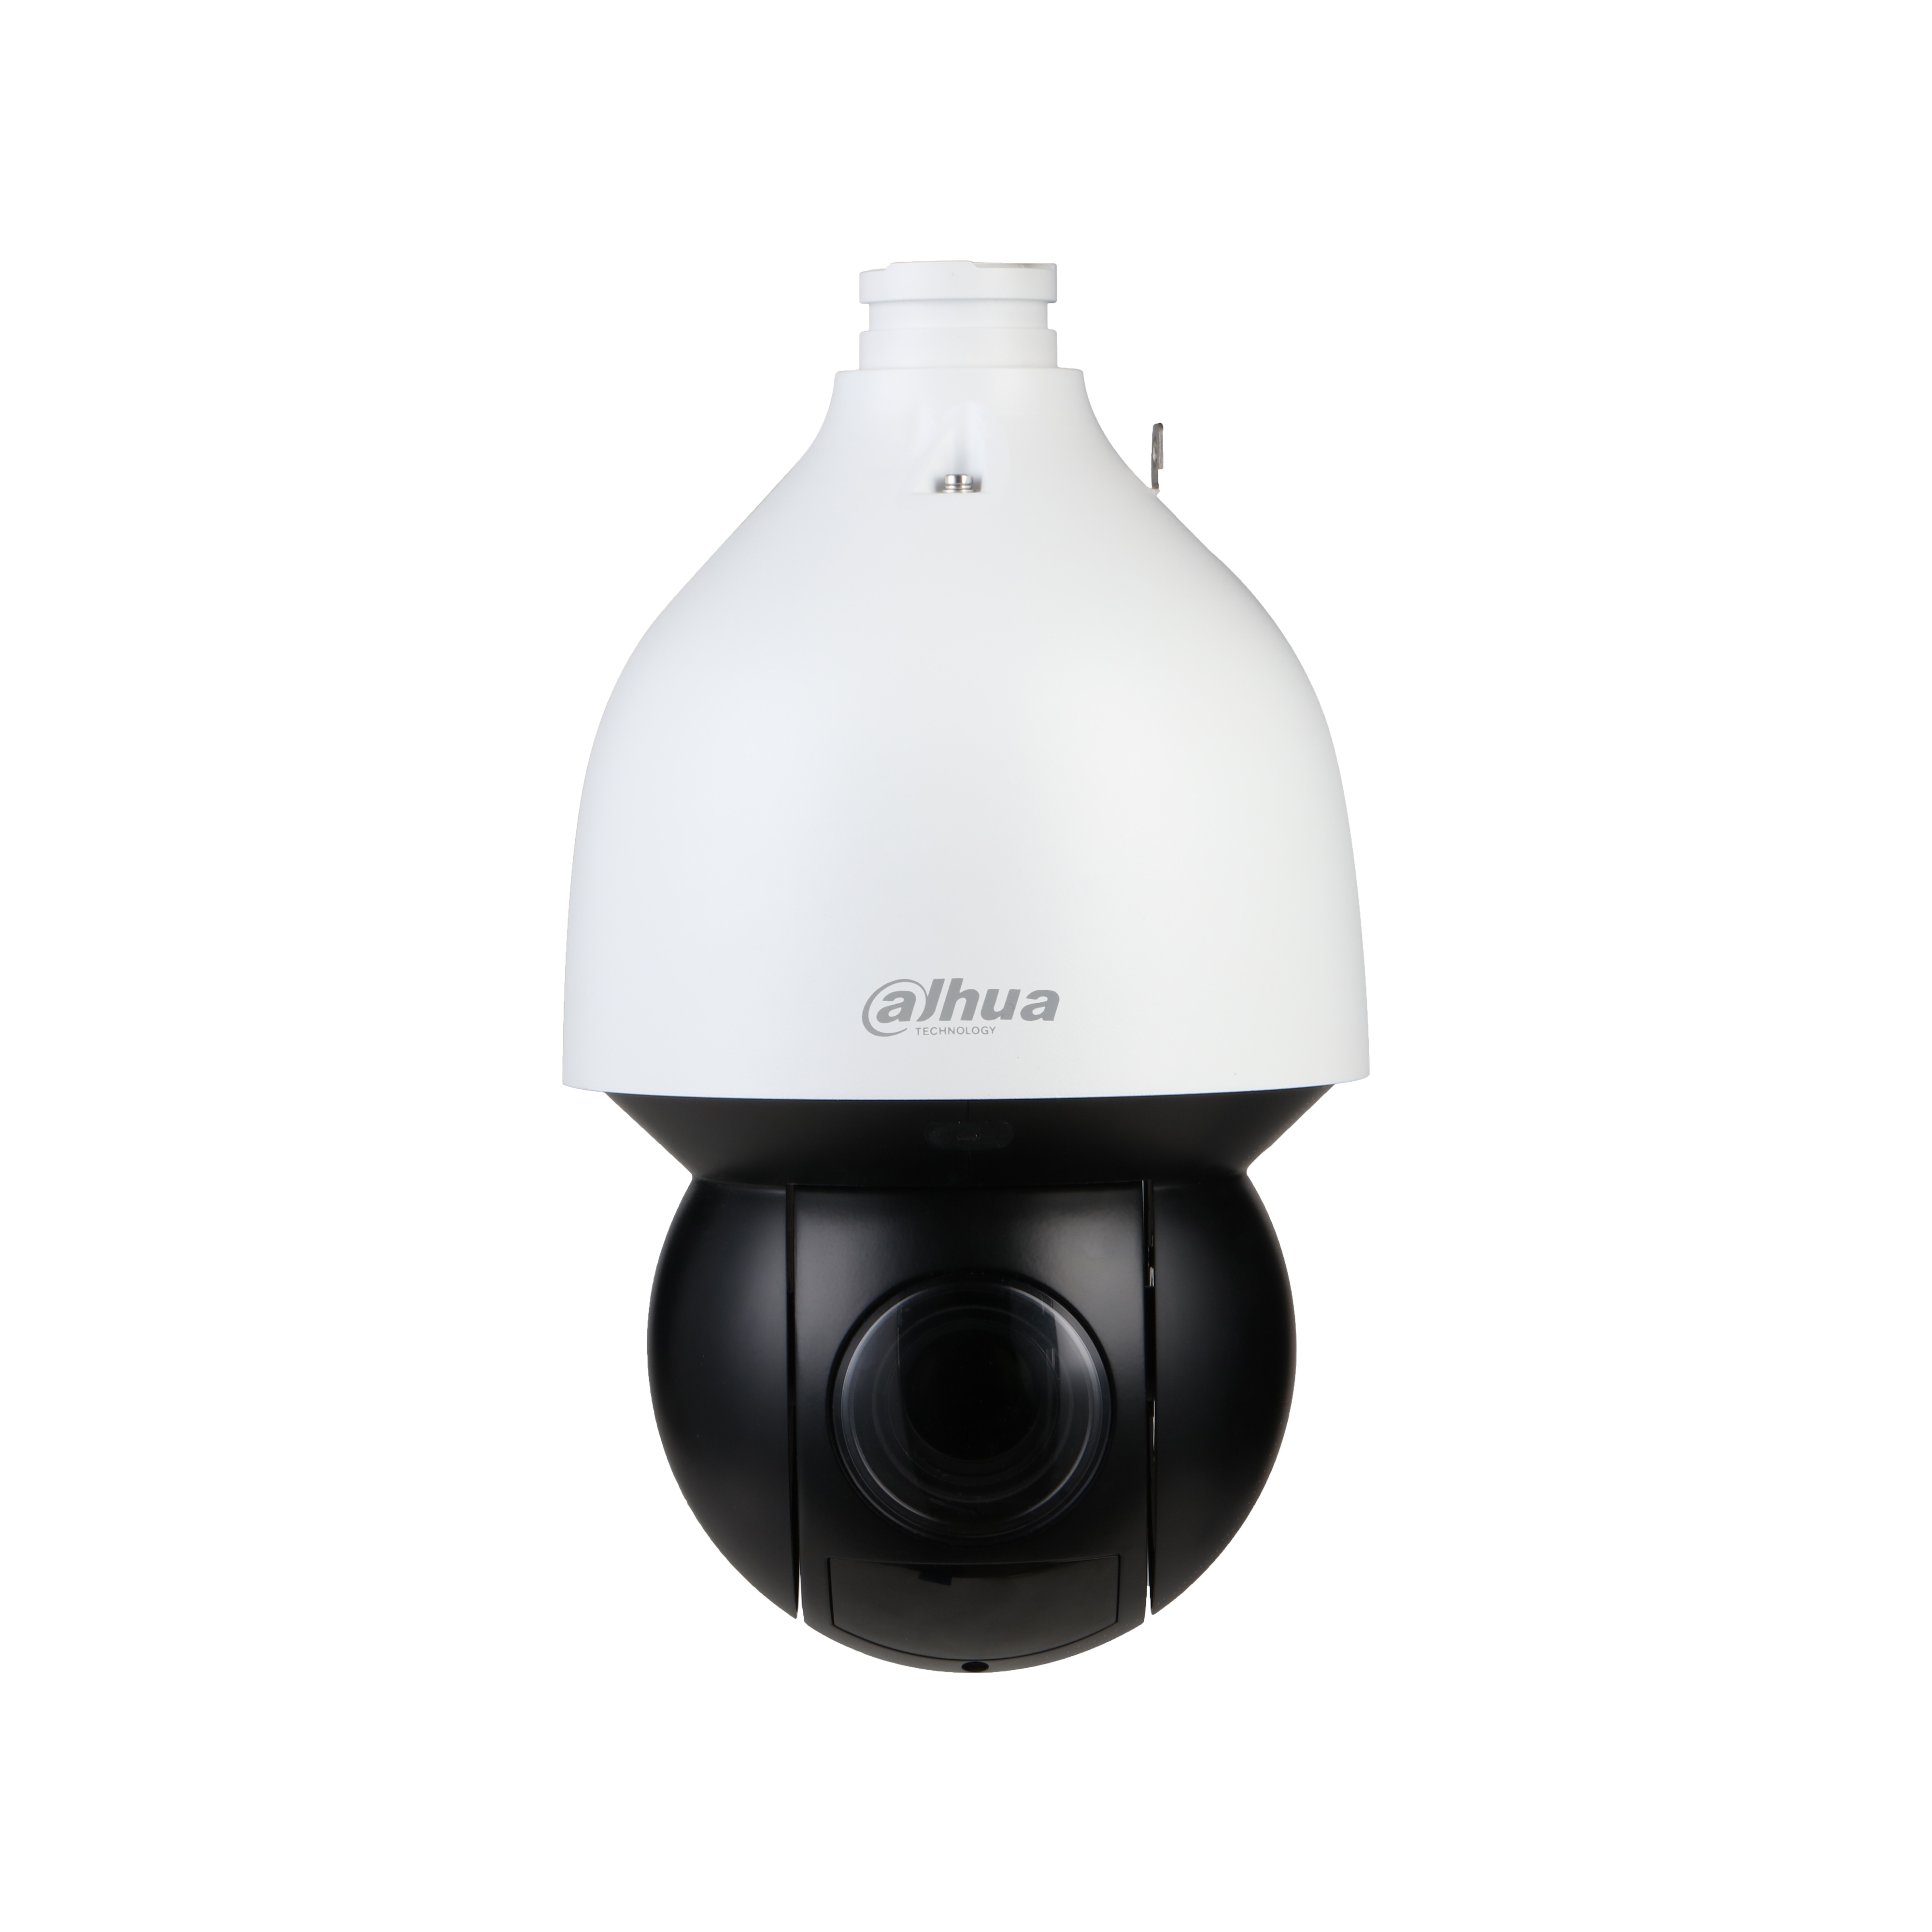 WIZSENSE SERIES IP CAMERA WHITE AI AUTO TRACKING 4MP H.264/4+/5/5+ SPEED DOME PTZ 120 WDR METAL 4.8-154MMMOTORISED LENS 32X ZOOM STARLIGHT IR 150M POE+ IP67 WITHOUT MIC AUDIO IN AUDIO OUT 2 x ALARM IN 1 x ALARM OUT SUPPORT UP TO 512GB SDIK10 24VDC